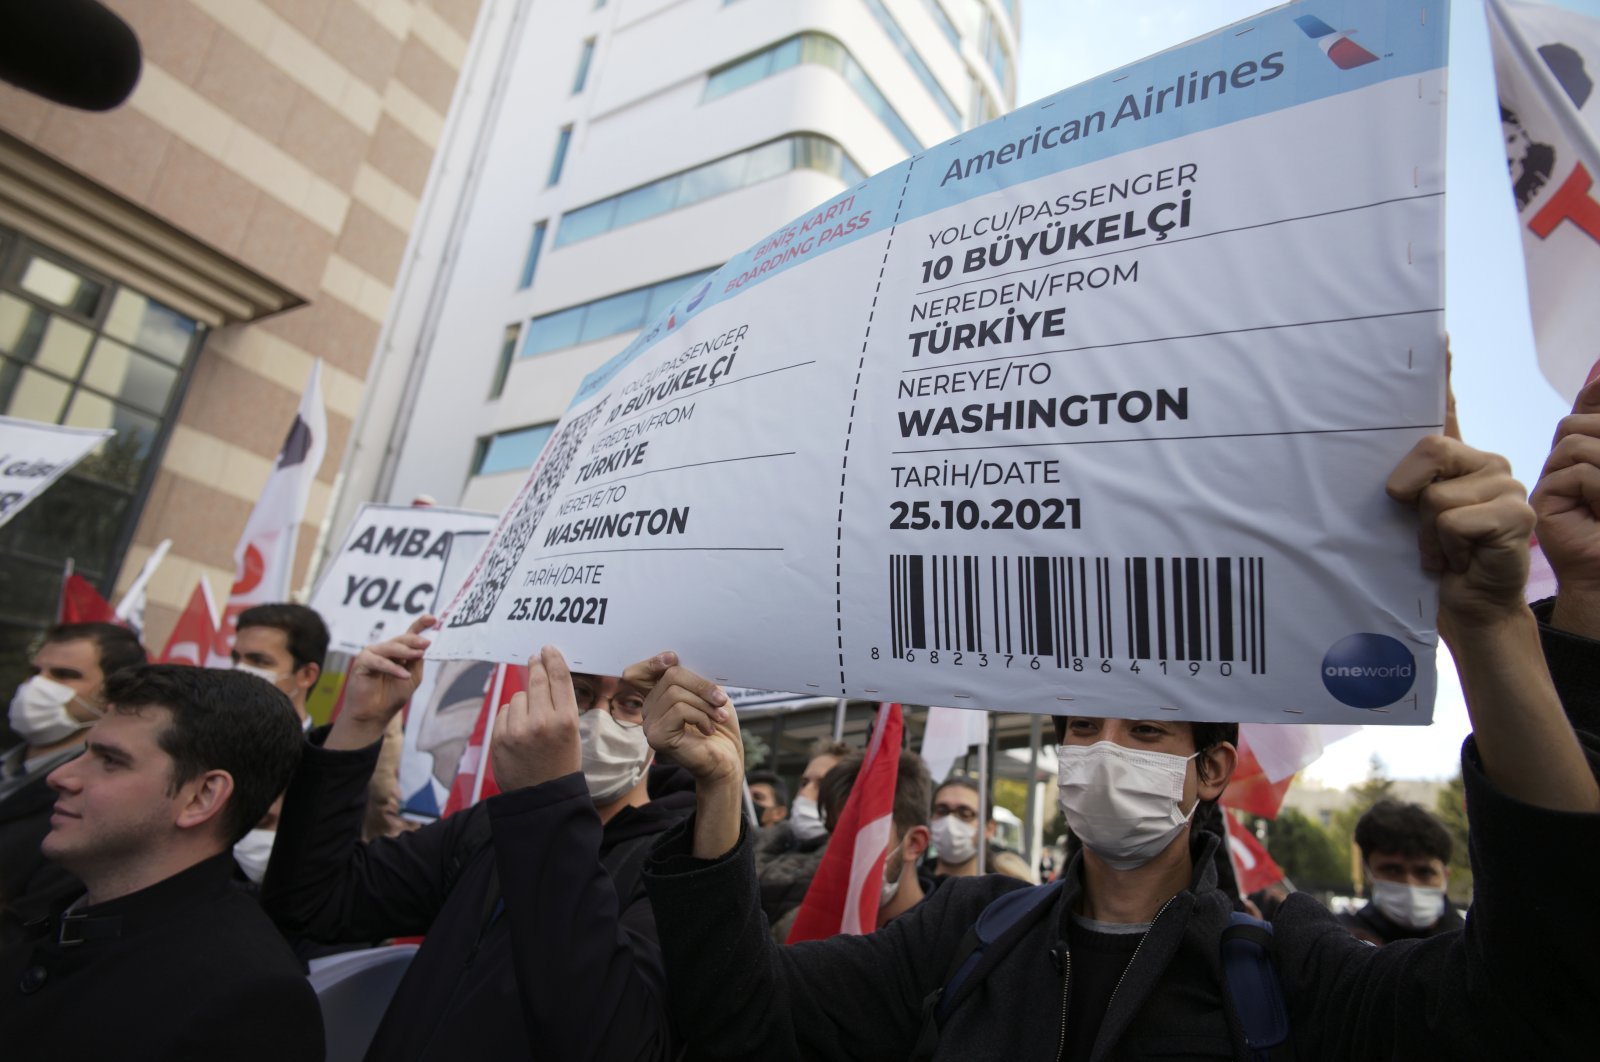 Members of a Turkish group hold a symbolic boarding pass for 10 foreign ambassadors as they stage a protest near the U. S. Embassy, in Ankara, Turkey, Oct. 25, 2021. (AP Photo)